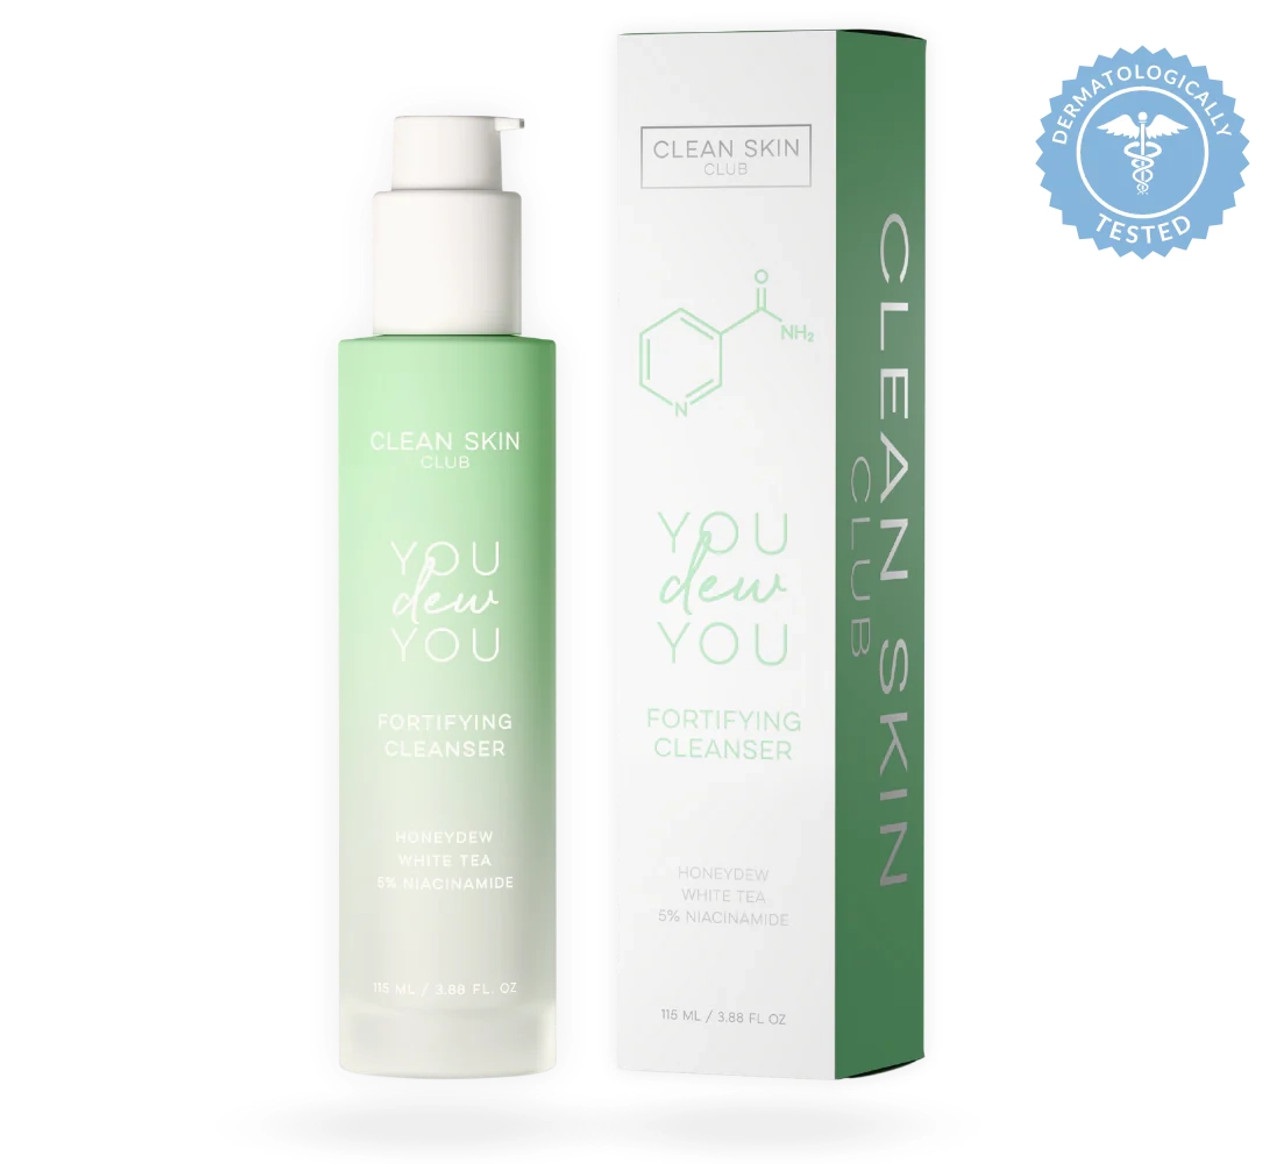 Clean Skin Club You Dew You Fortifying Cleanser